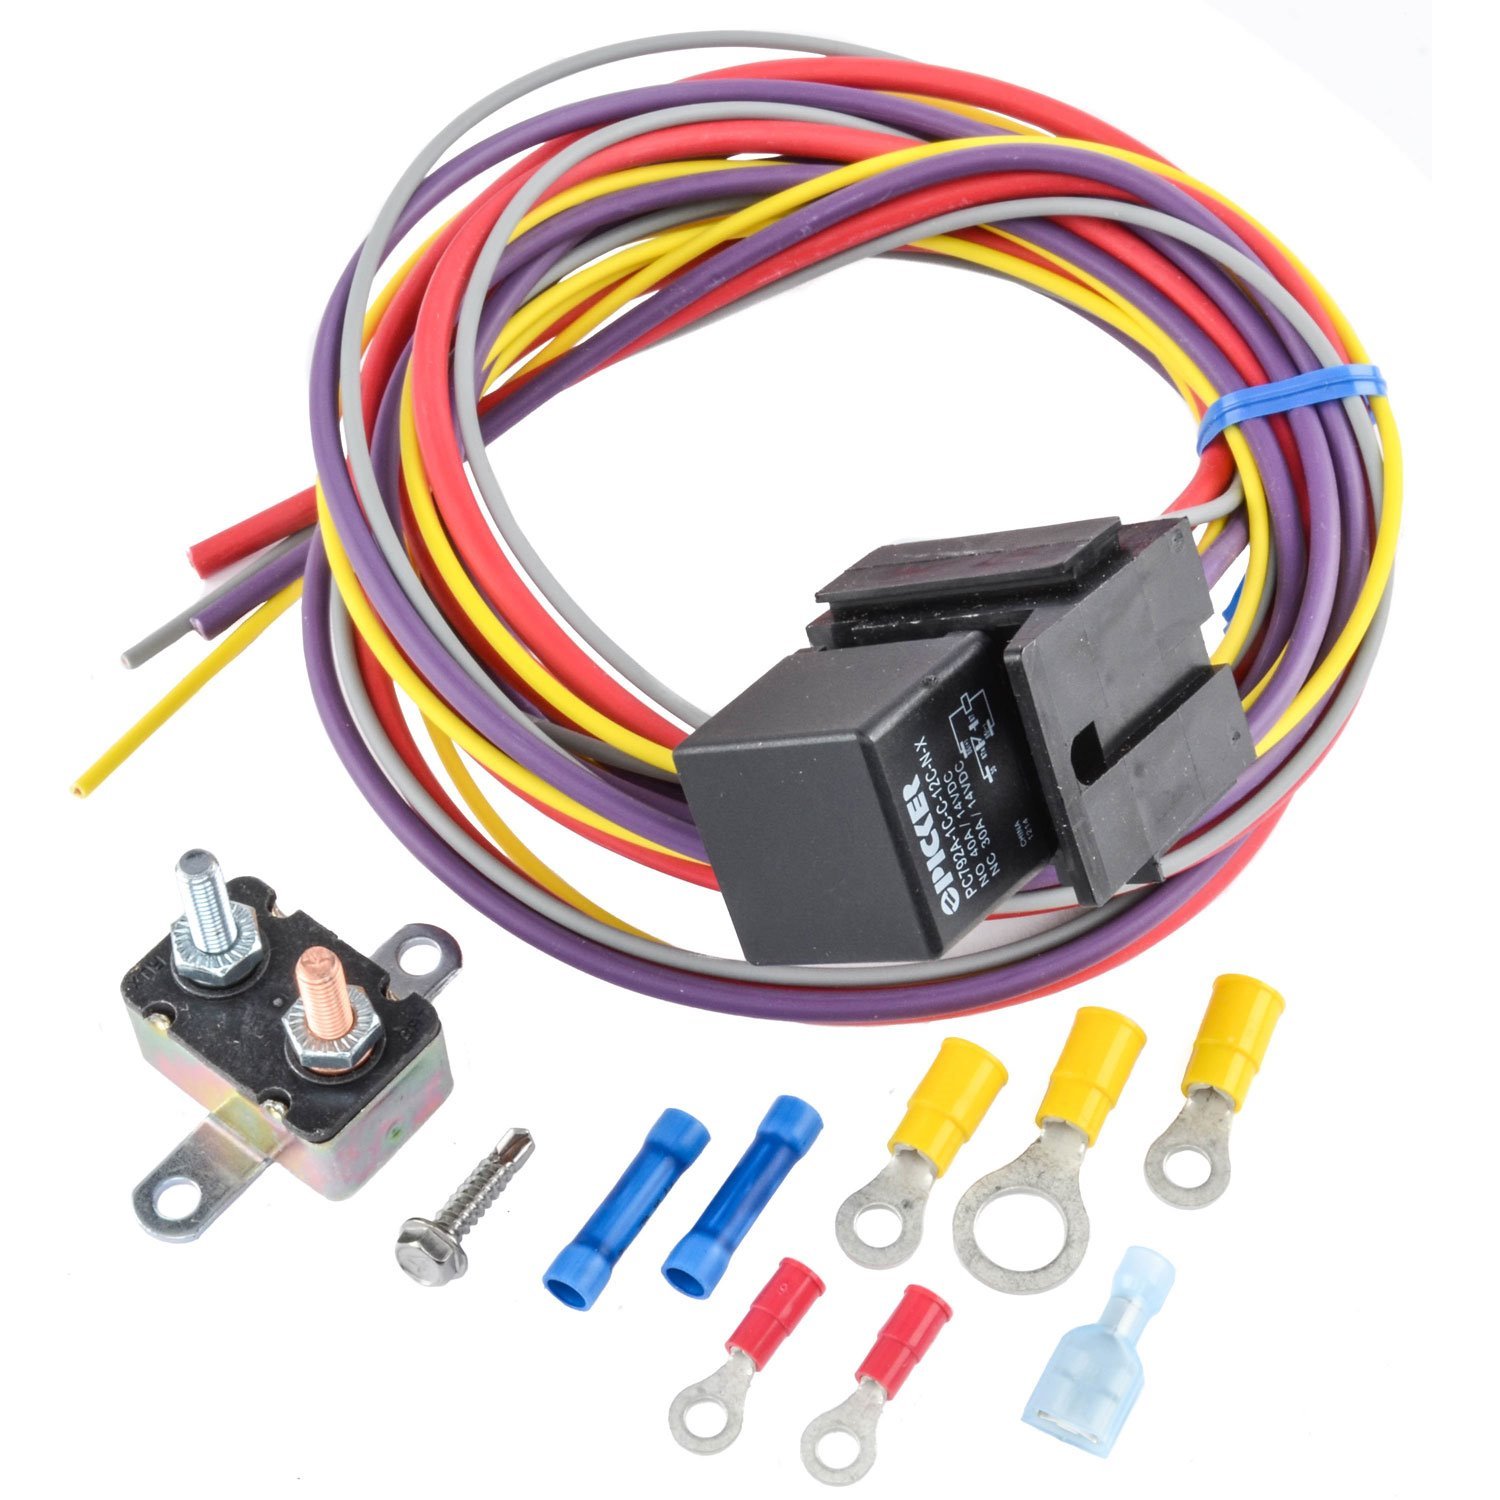 Manual-Controlled Single Fan Wiring Harness & Relay Kit 30 Amp